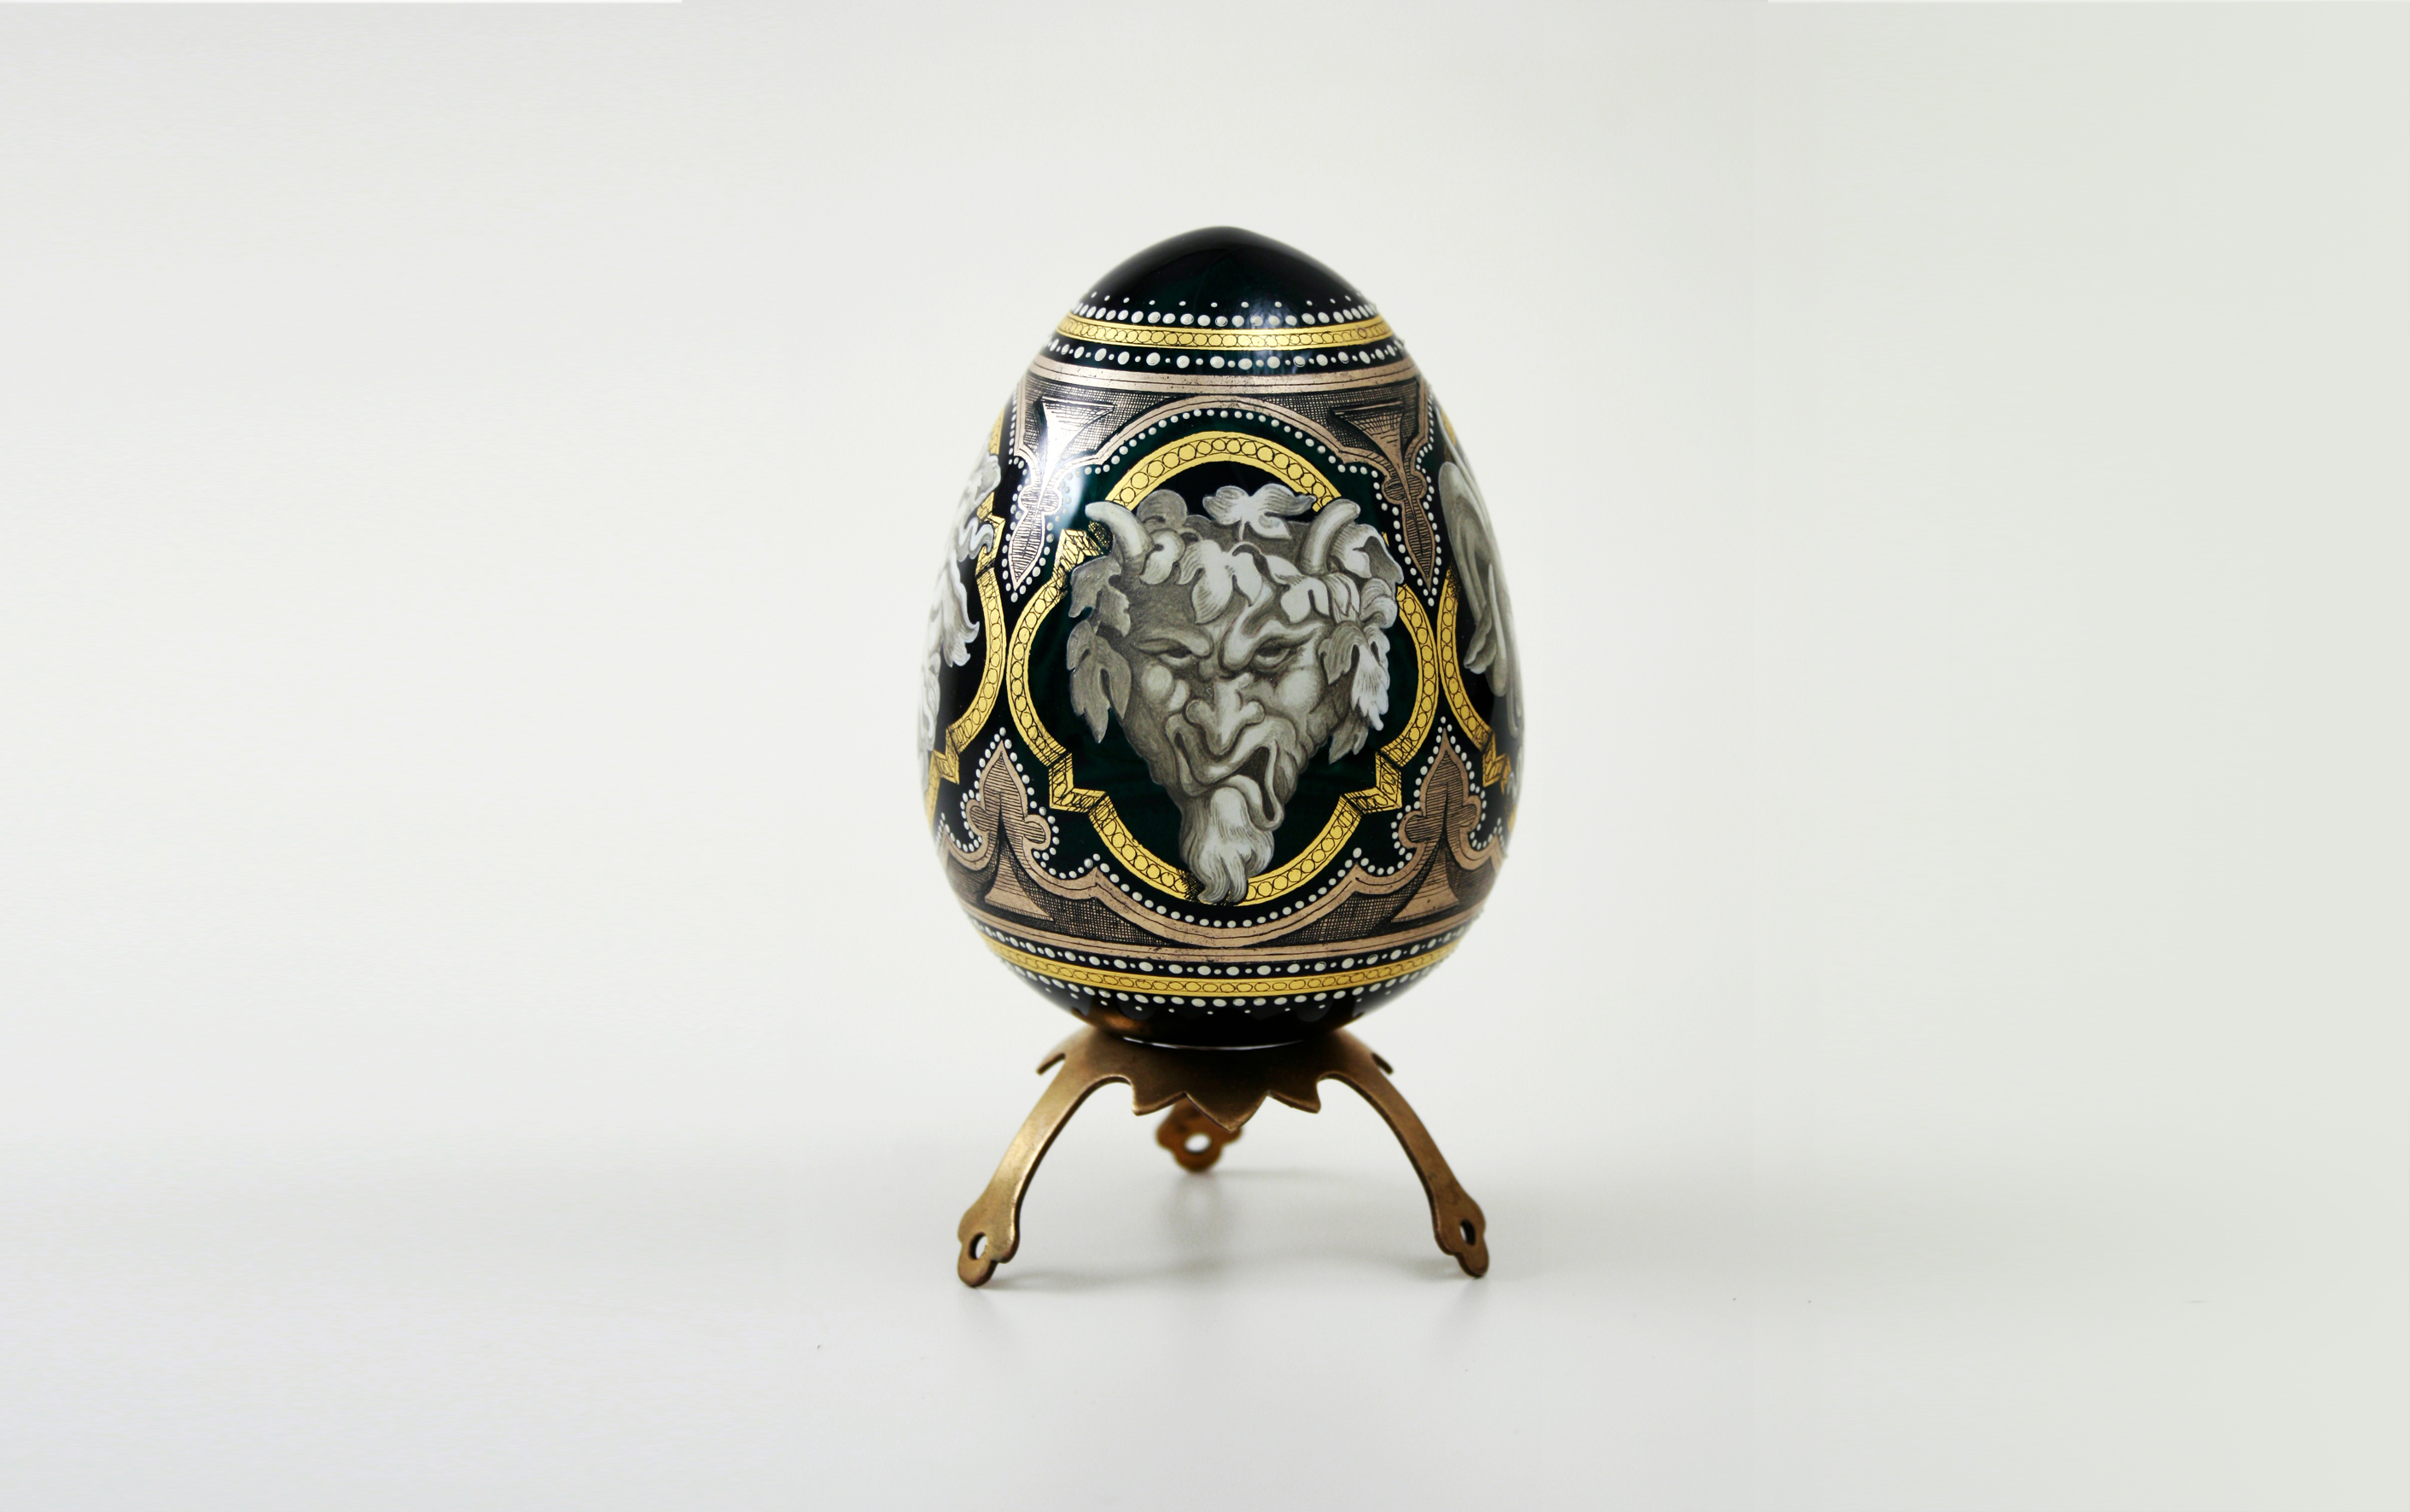 collectible decorated glass eggs